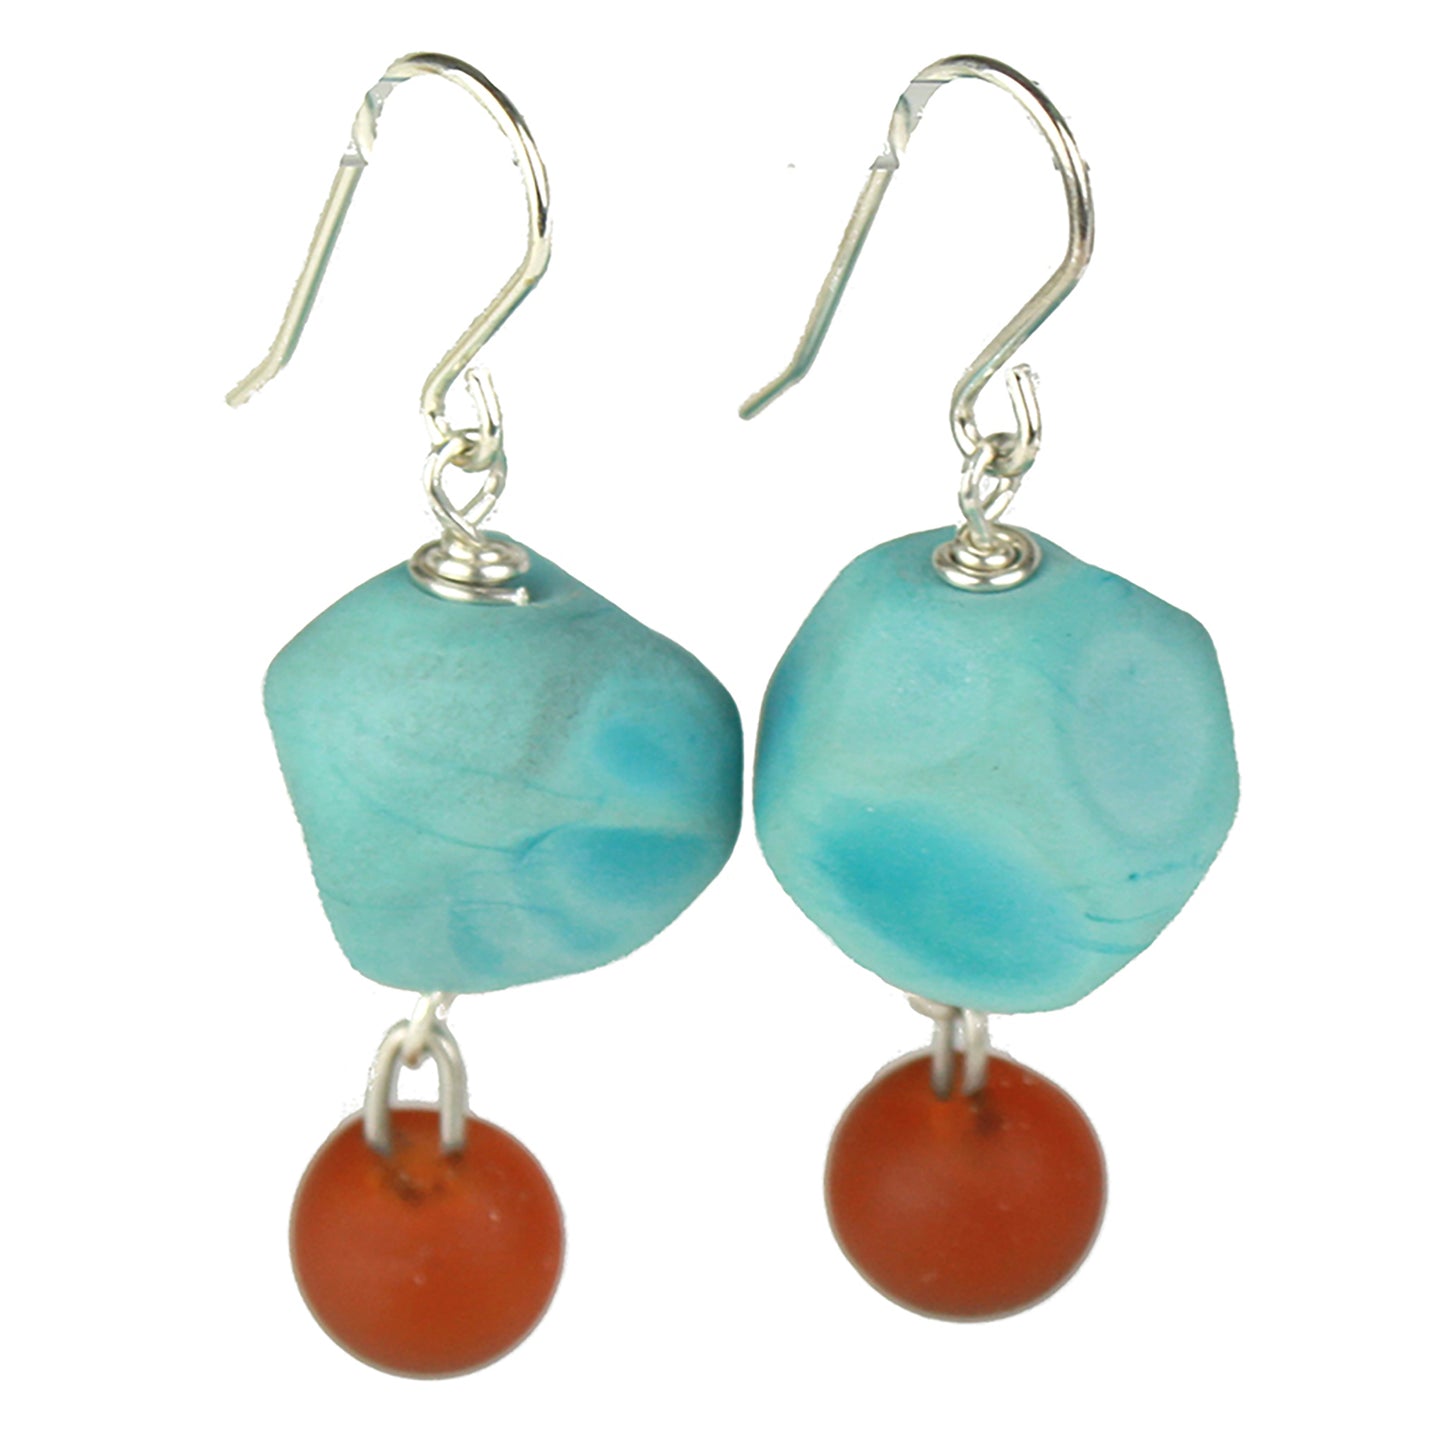 Nugget and charm earrings - turquoise and amber